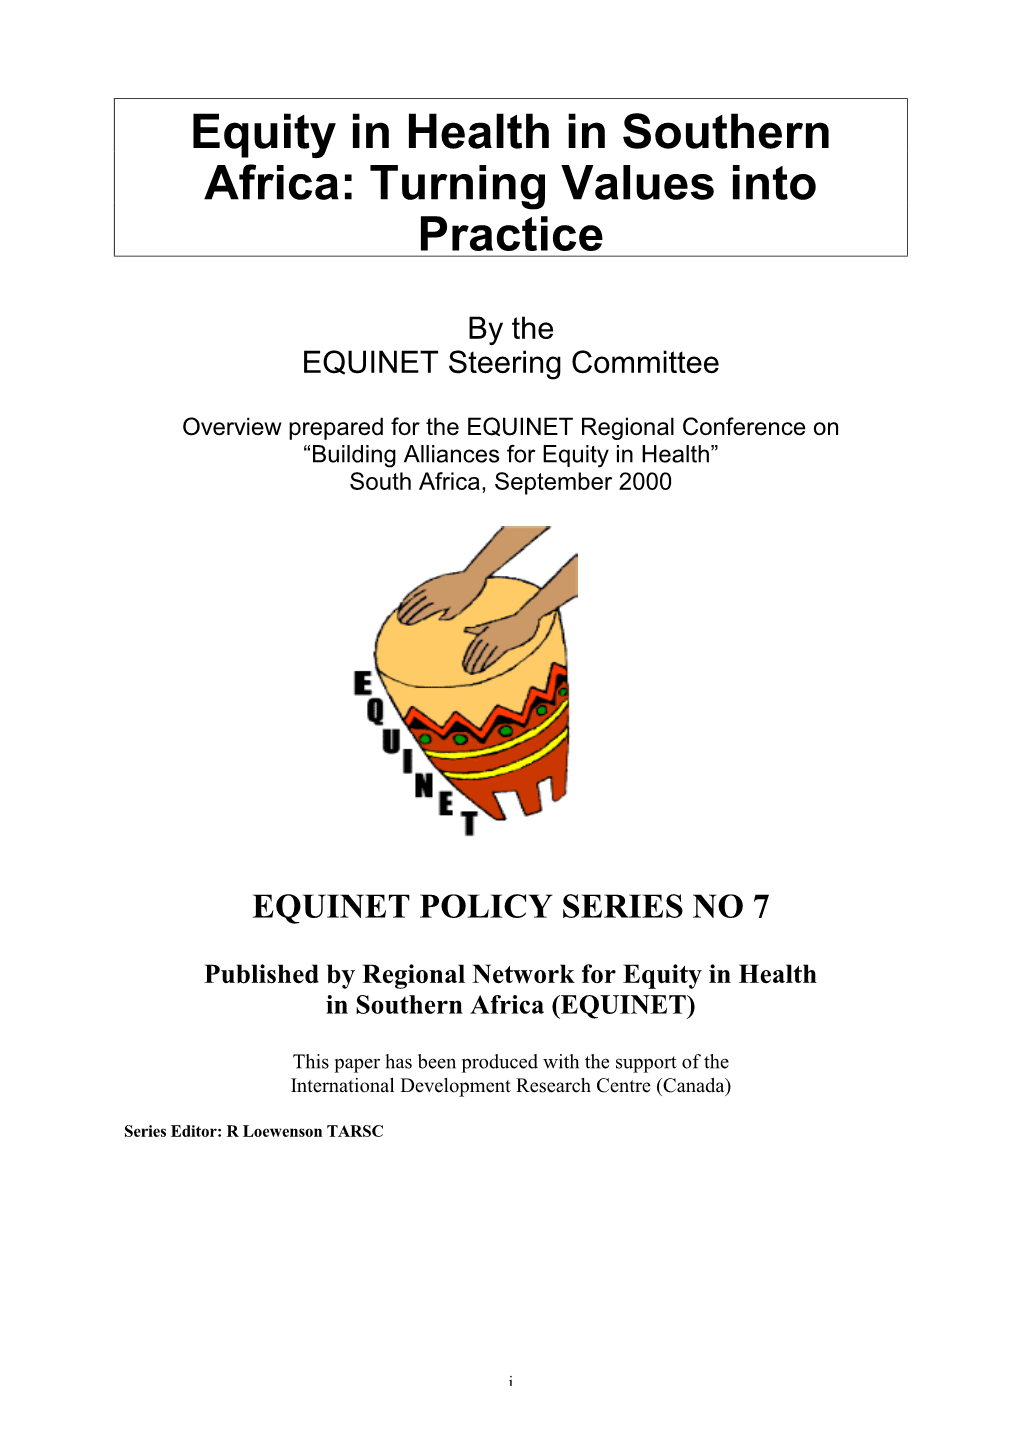 Equity in Health in Southern Africa: Turning Values Into Practice